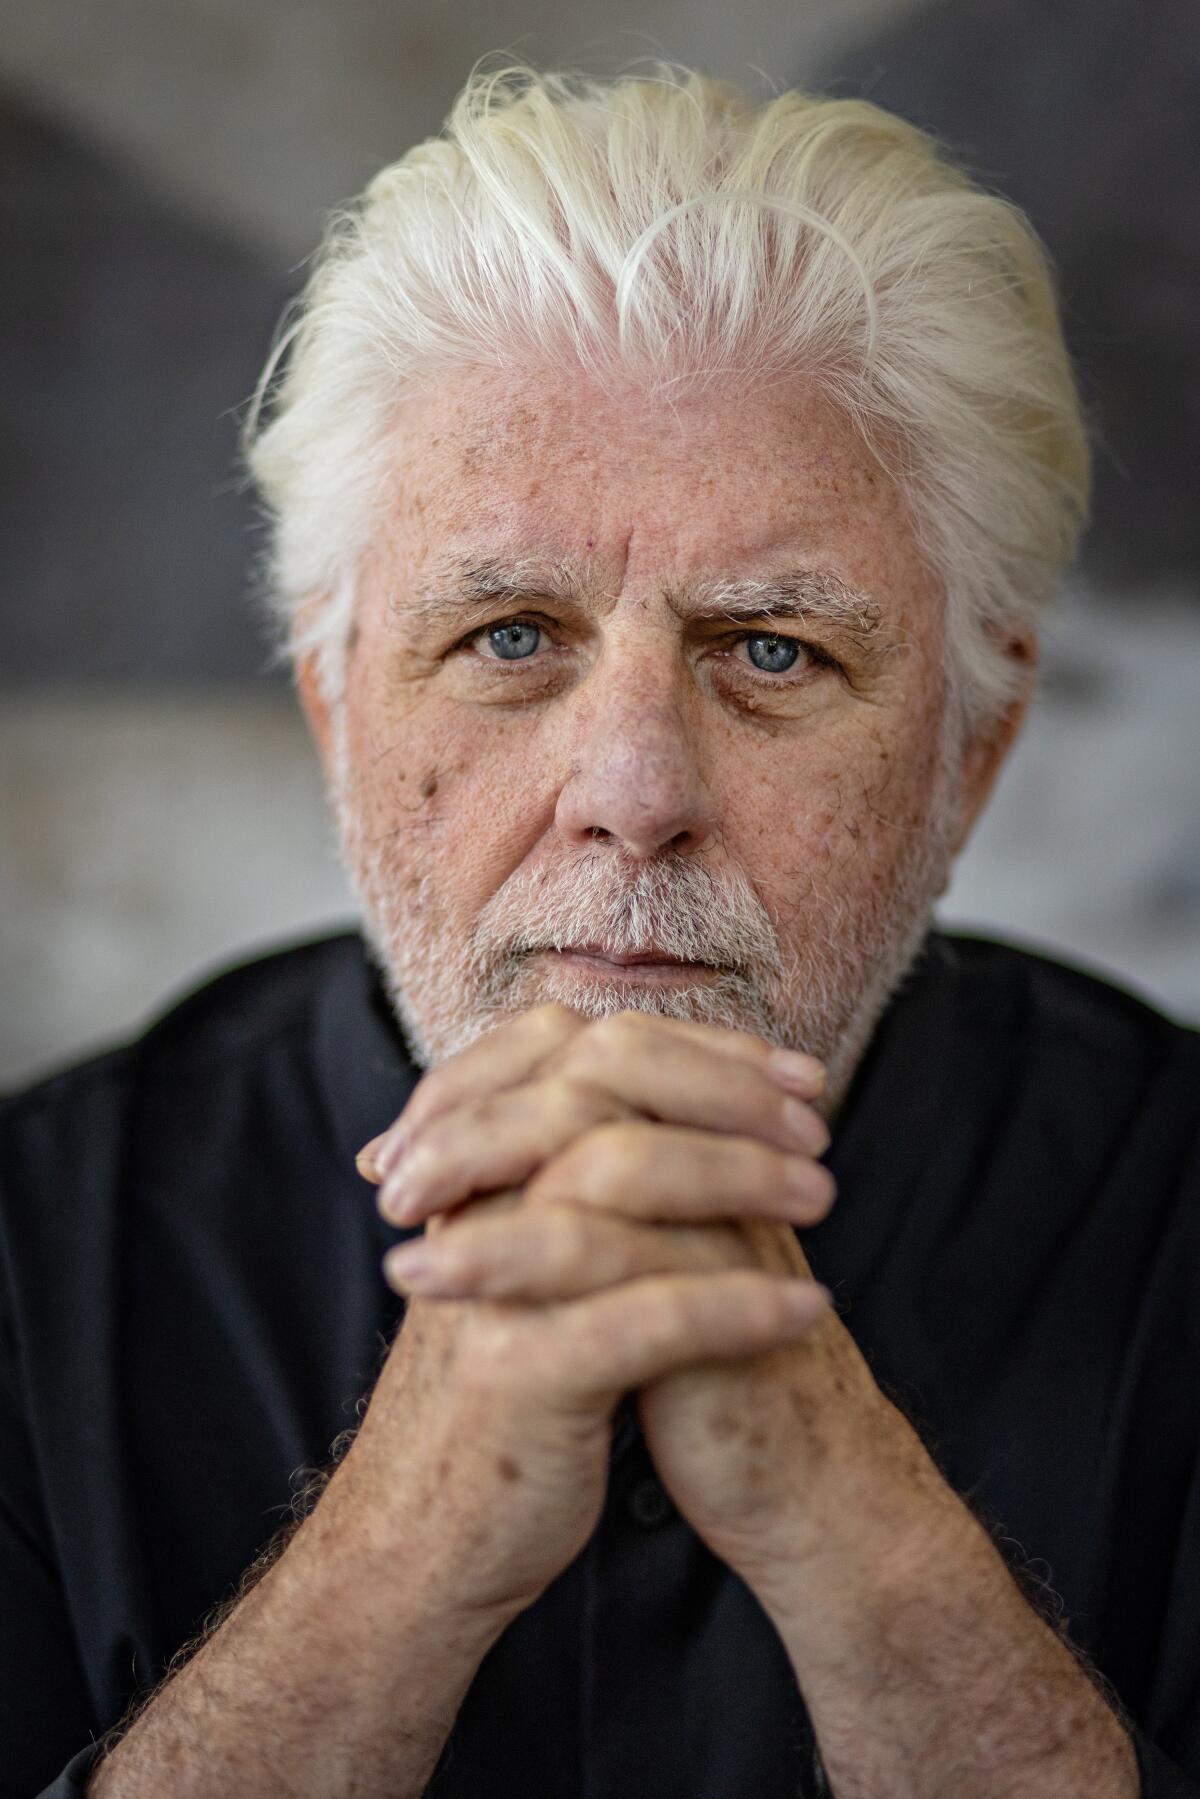 Michael McDonald with his hands clasped in front of his chin